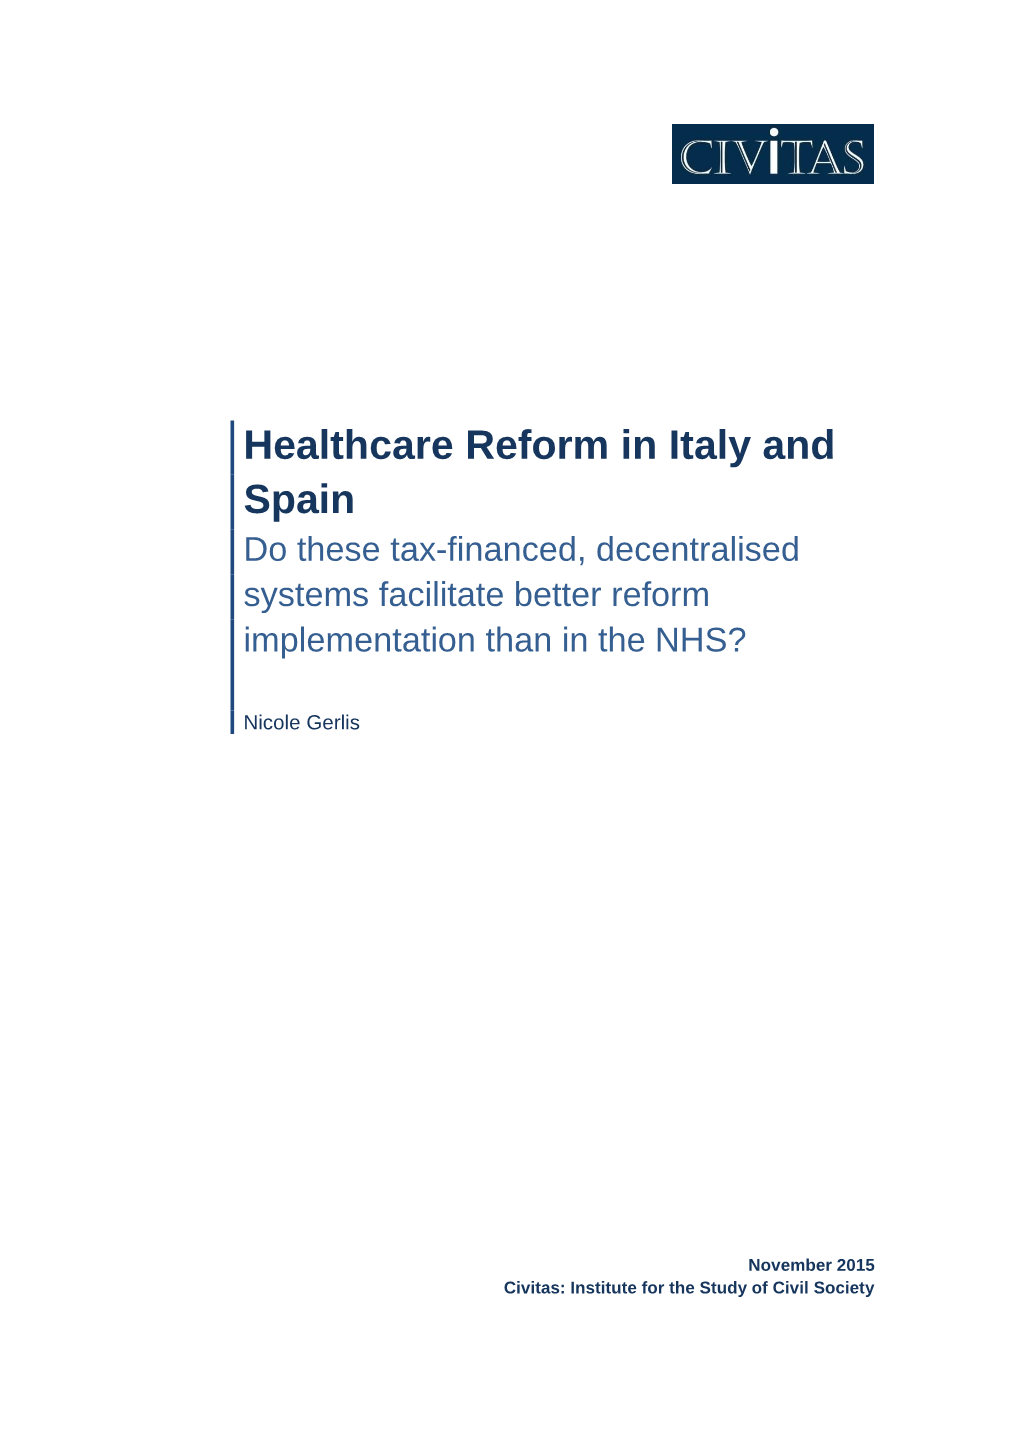 Healthcare Reform in Italy and Spain Do These Tax-Financed, Decentralised Systems Facilitate Better Reform Implementation Than in the NHS?